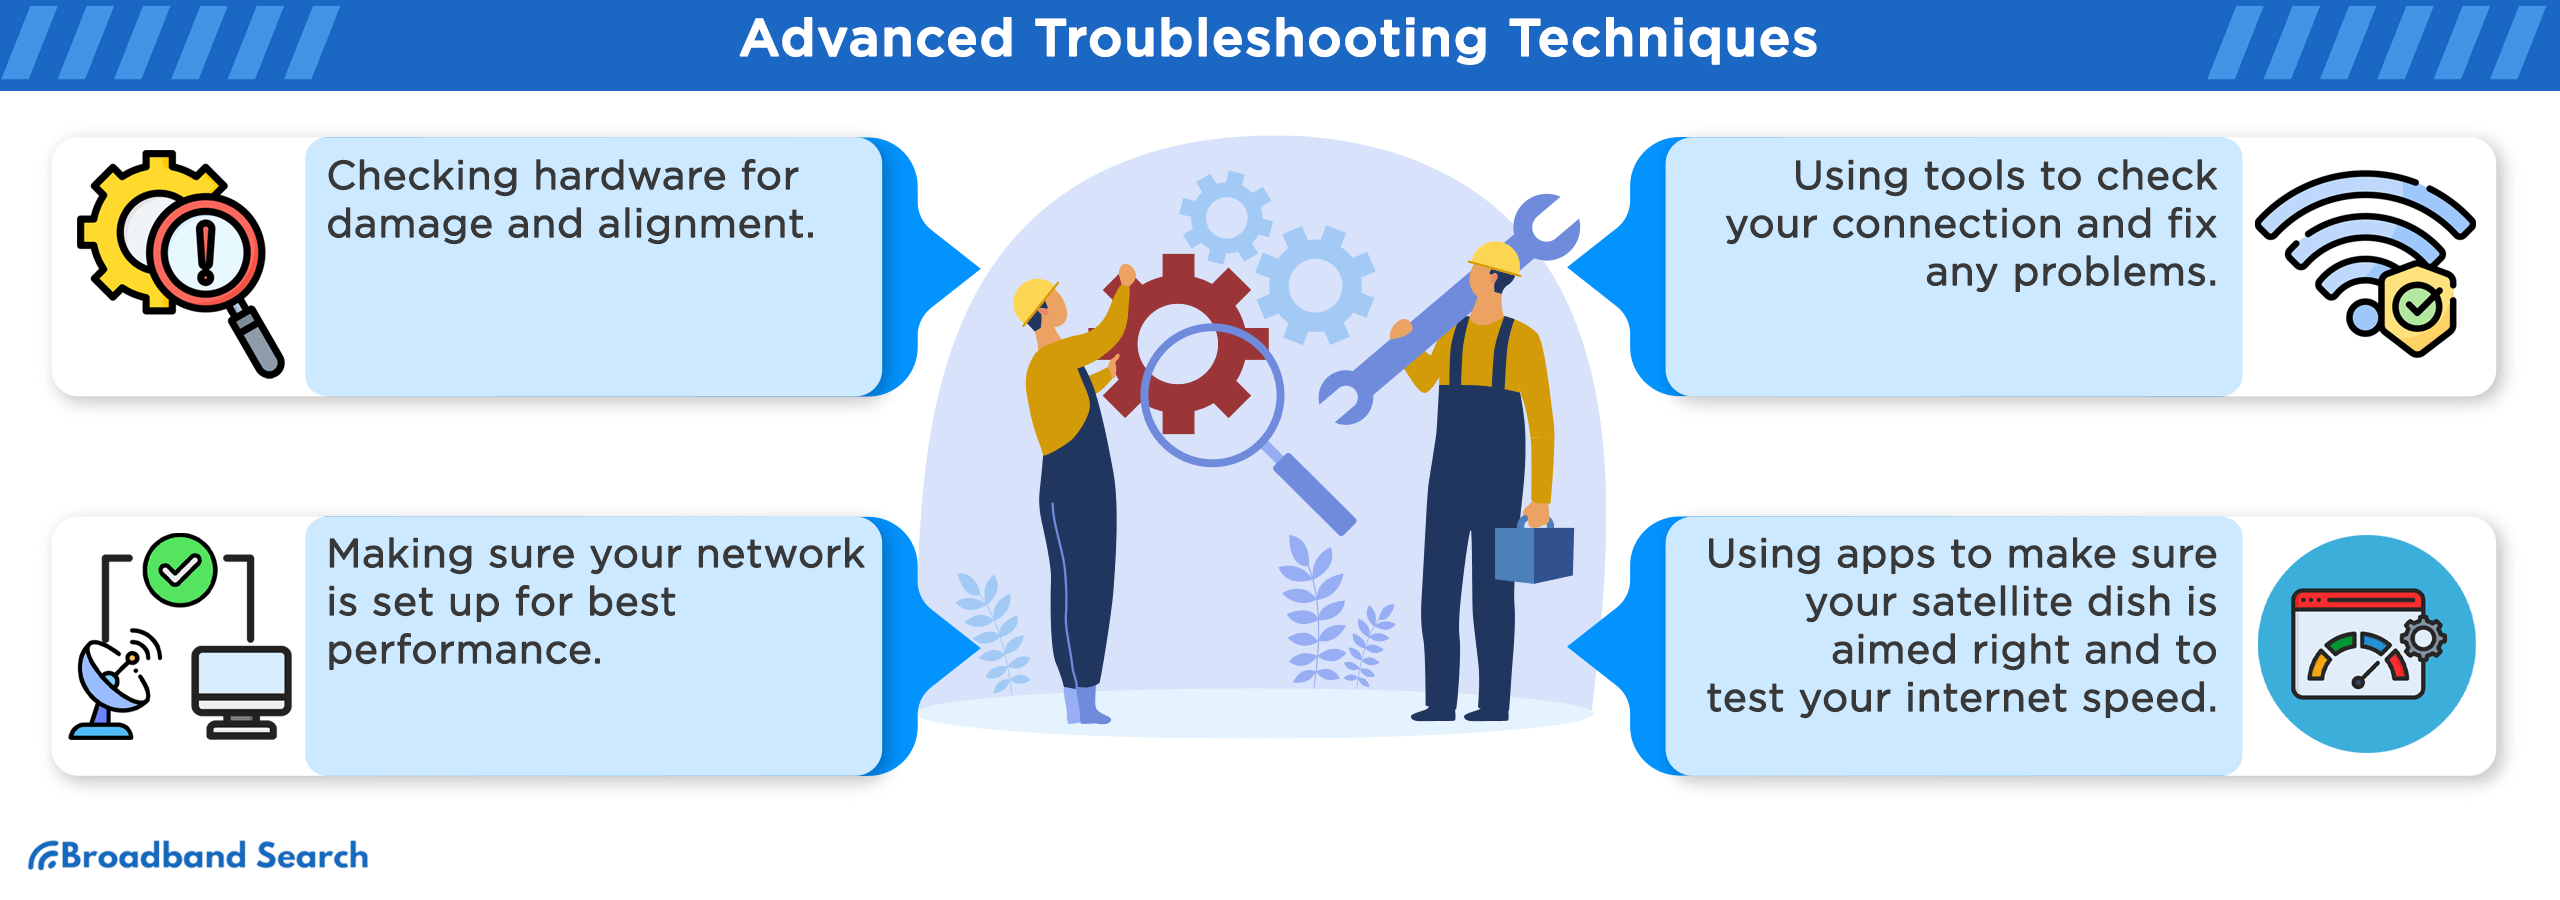 Advanced troubleshooting techniques